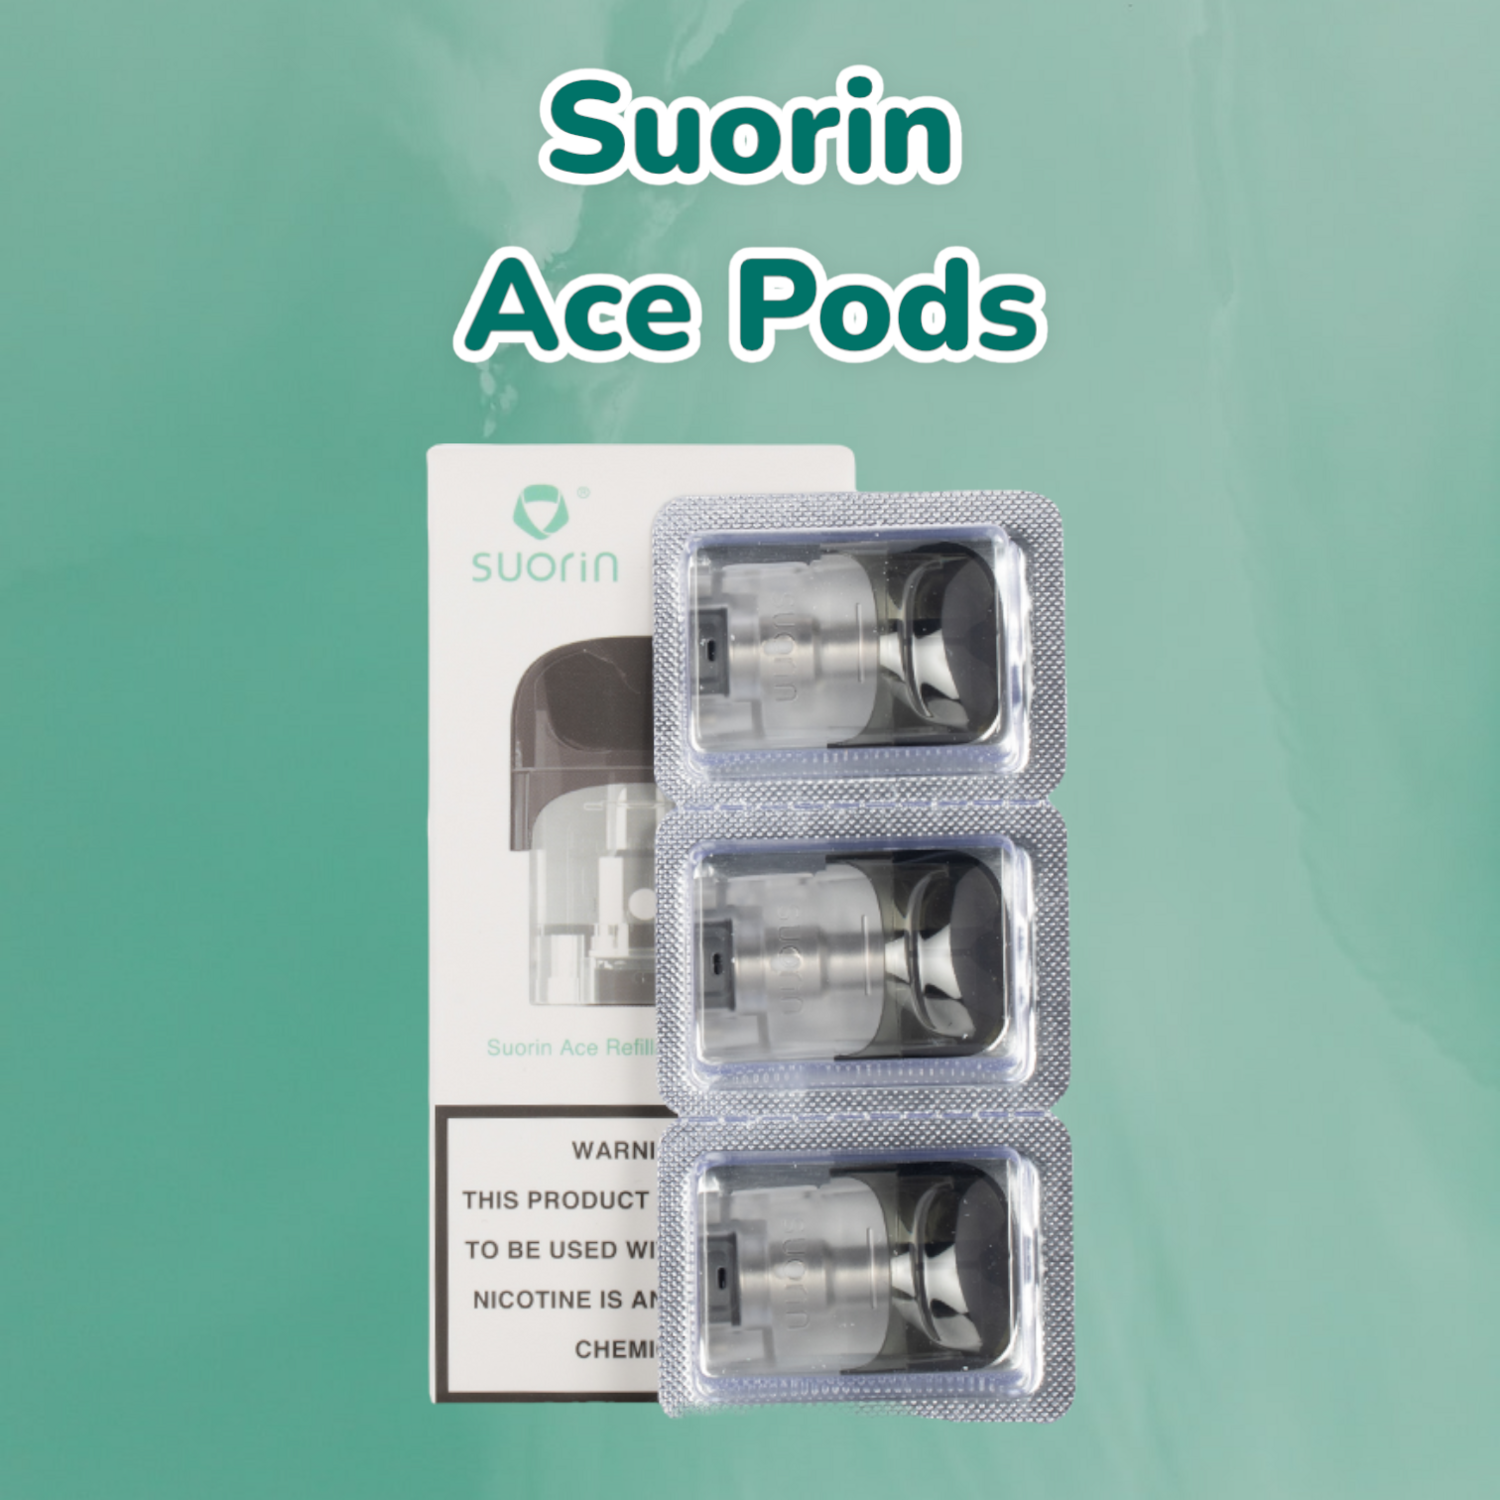 Suorin Ace Pods